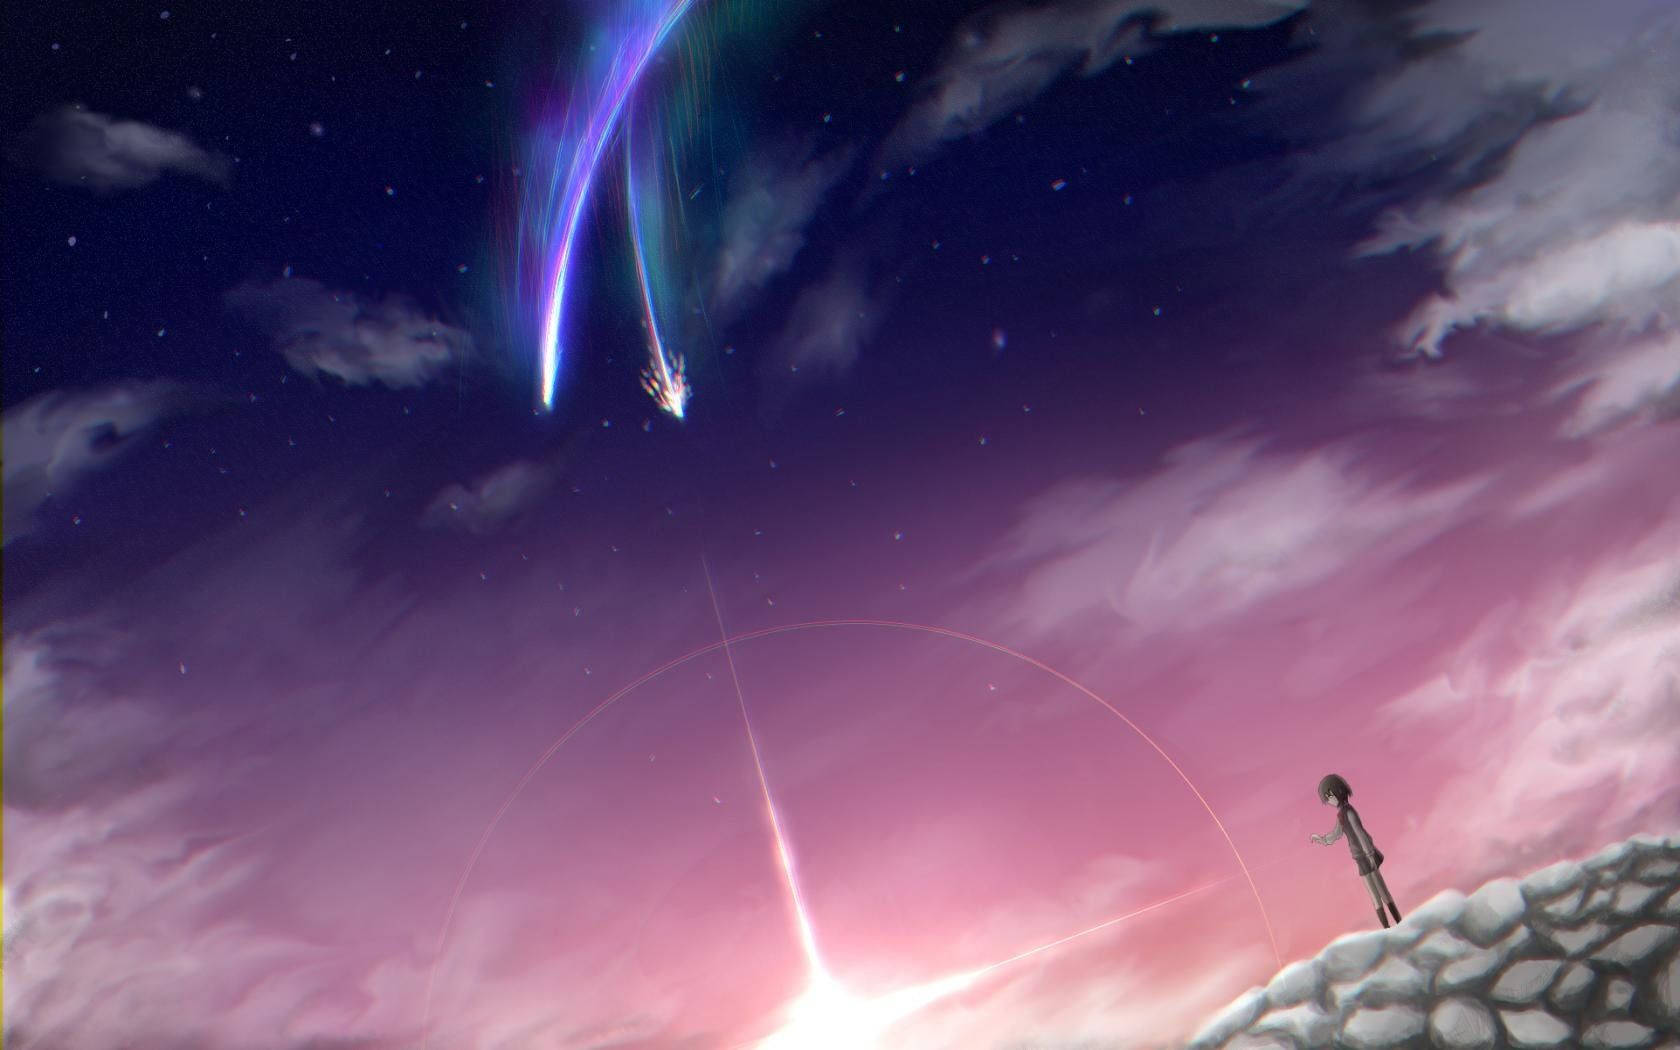 Mitsuha and the Splitting Comet from the movie 'Your Name' Wallpaper